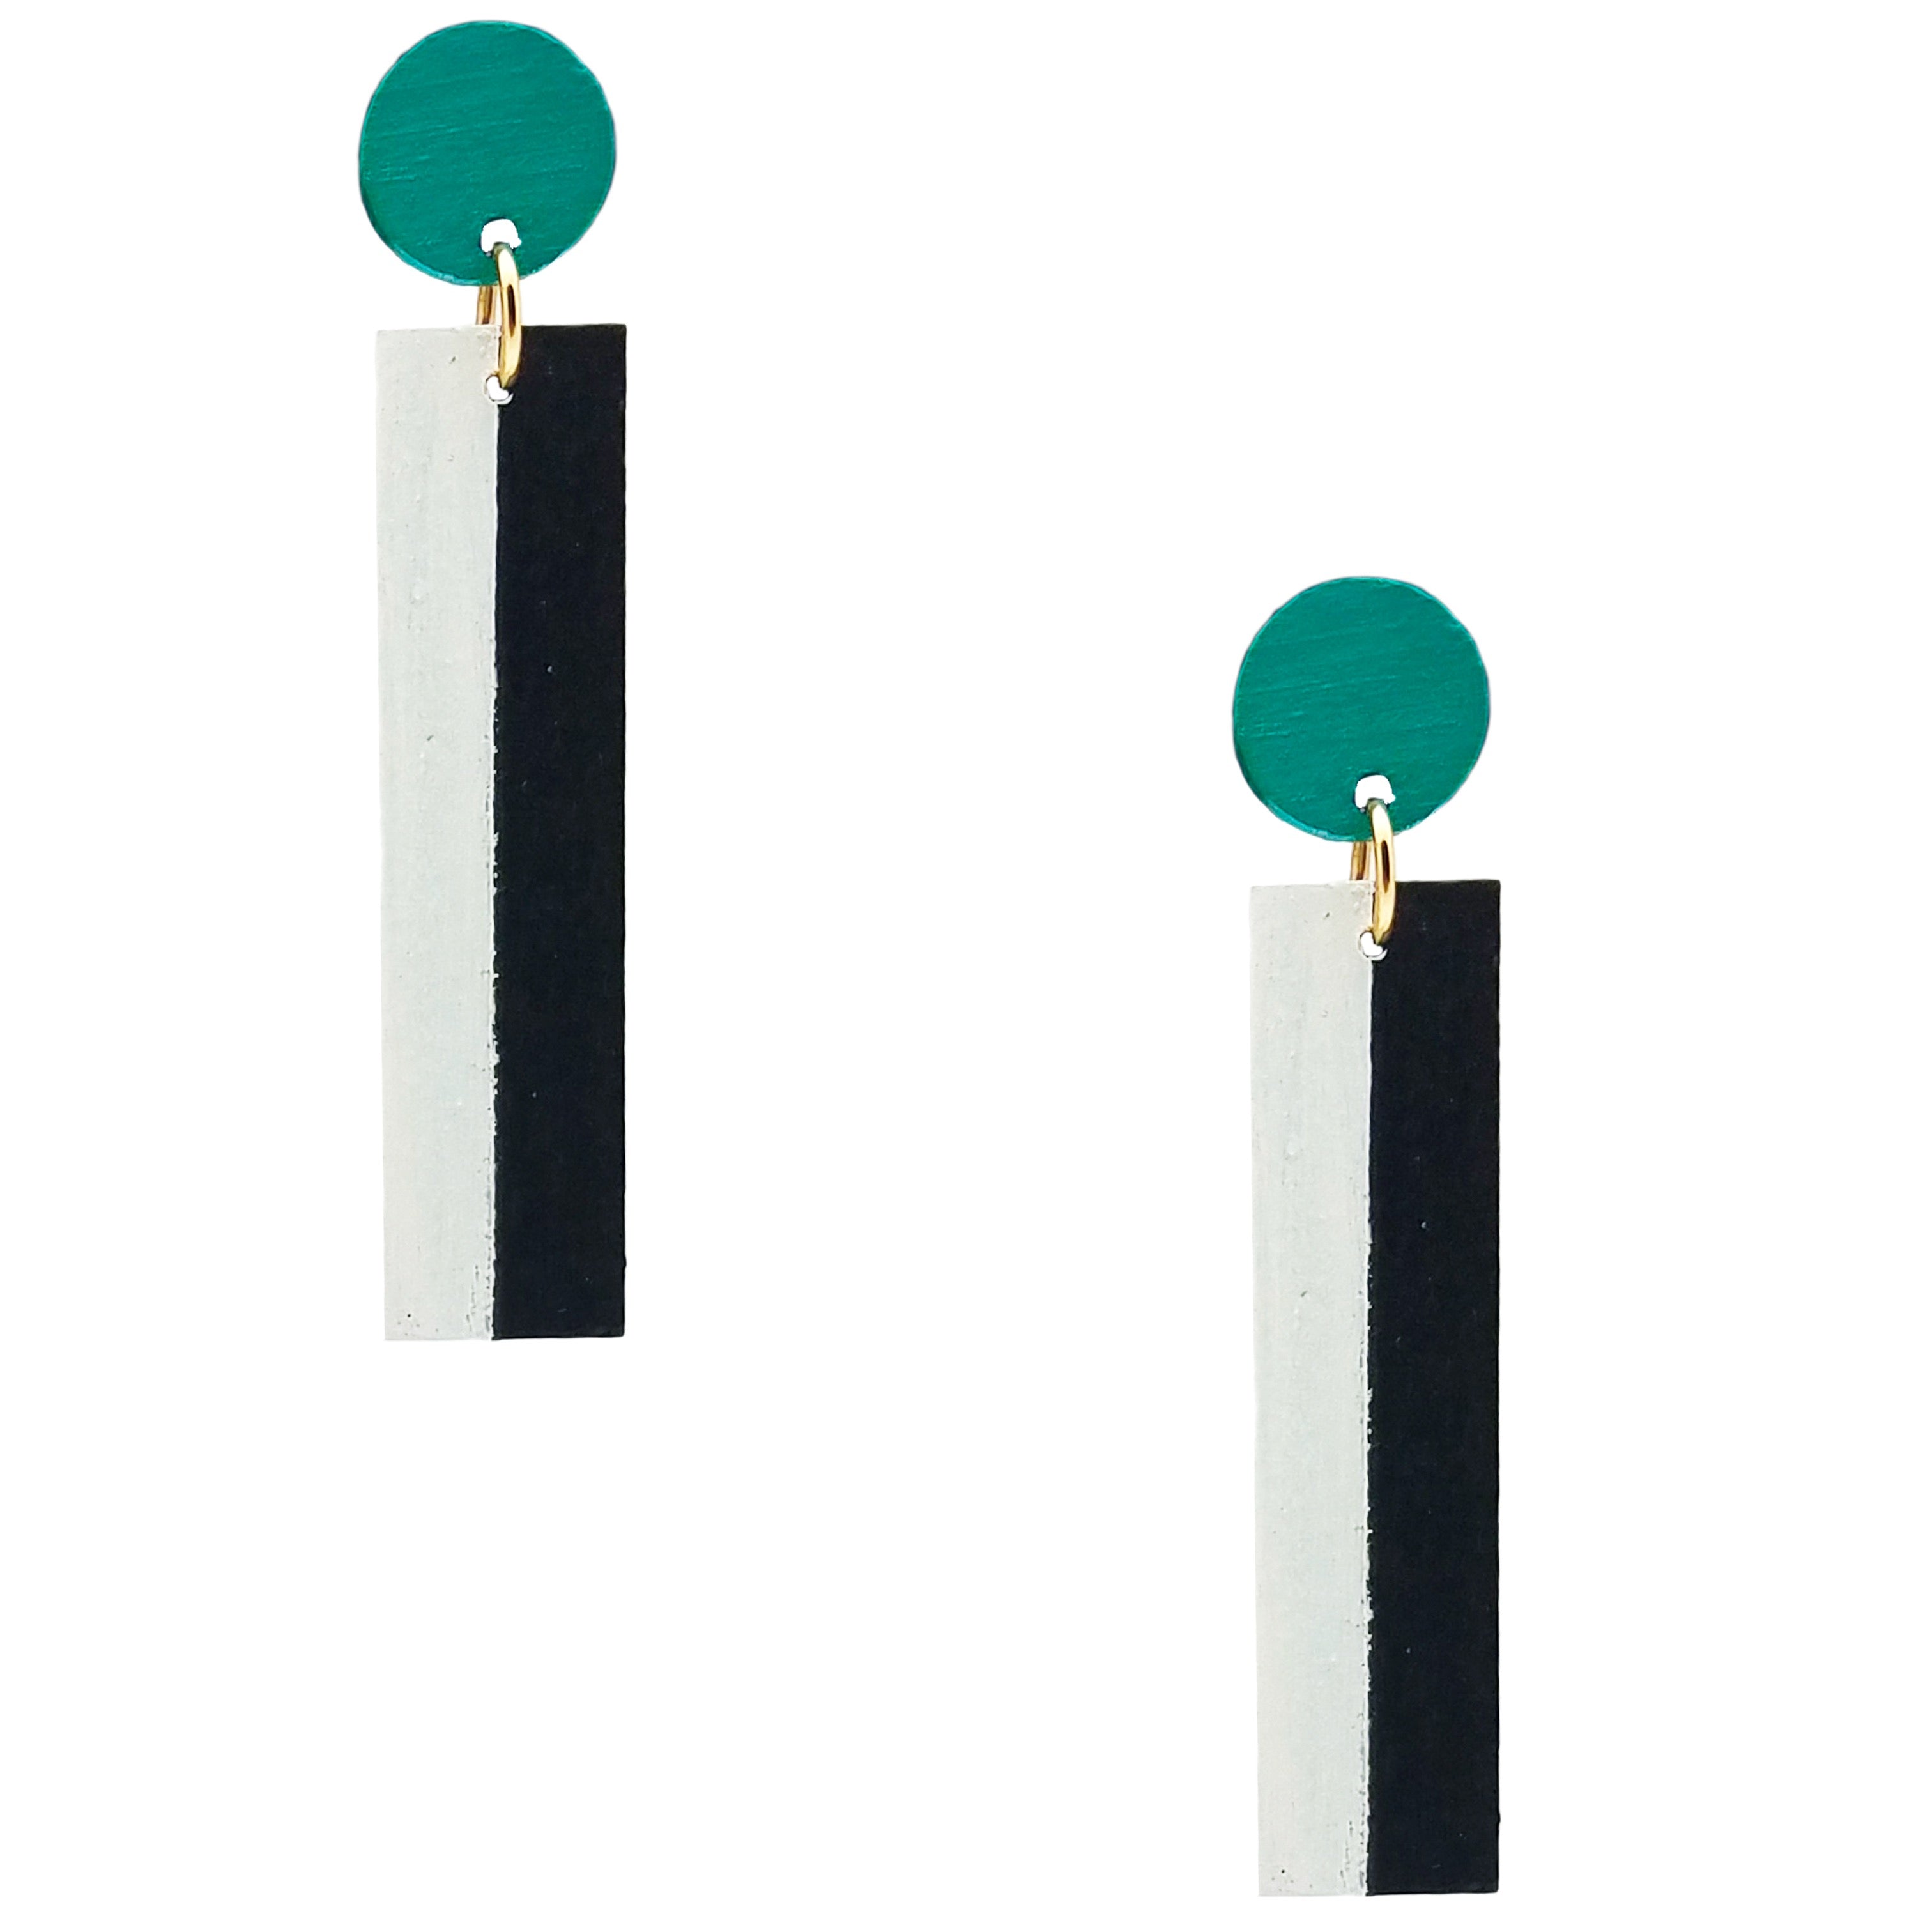 Geometric teal, white, and black color blocked statement earrings by the brand SCOTCHBONNET.